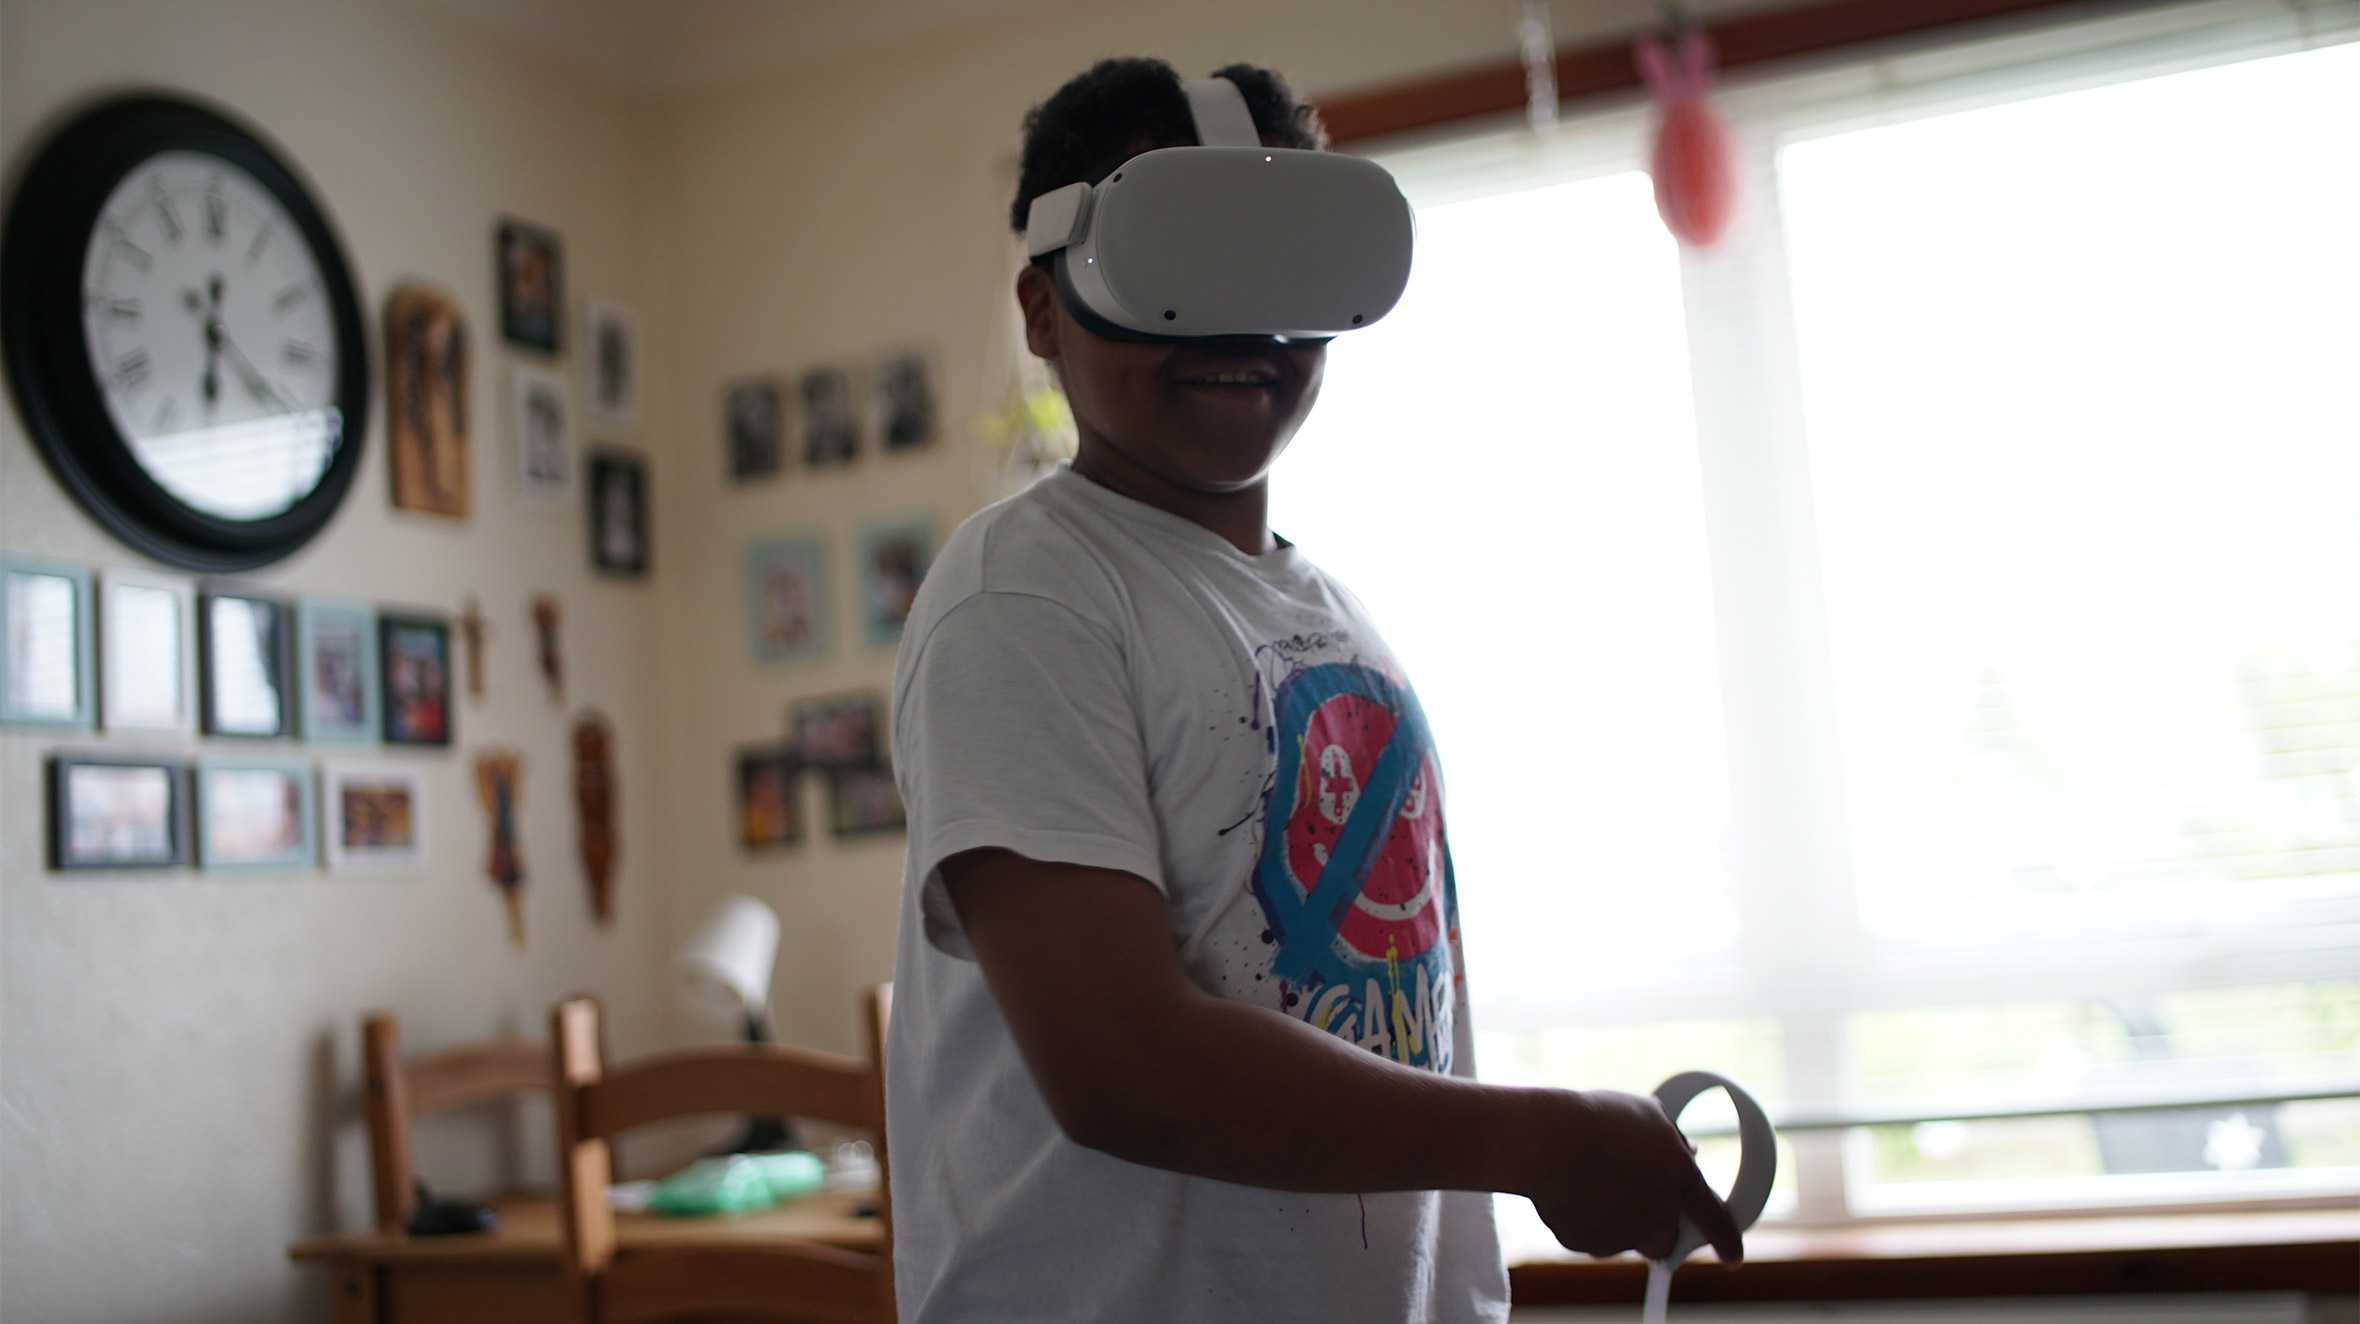 Lukasz, playing a game with his VR headset on.